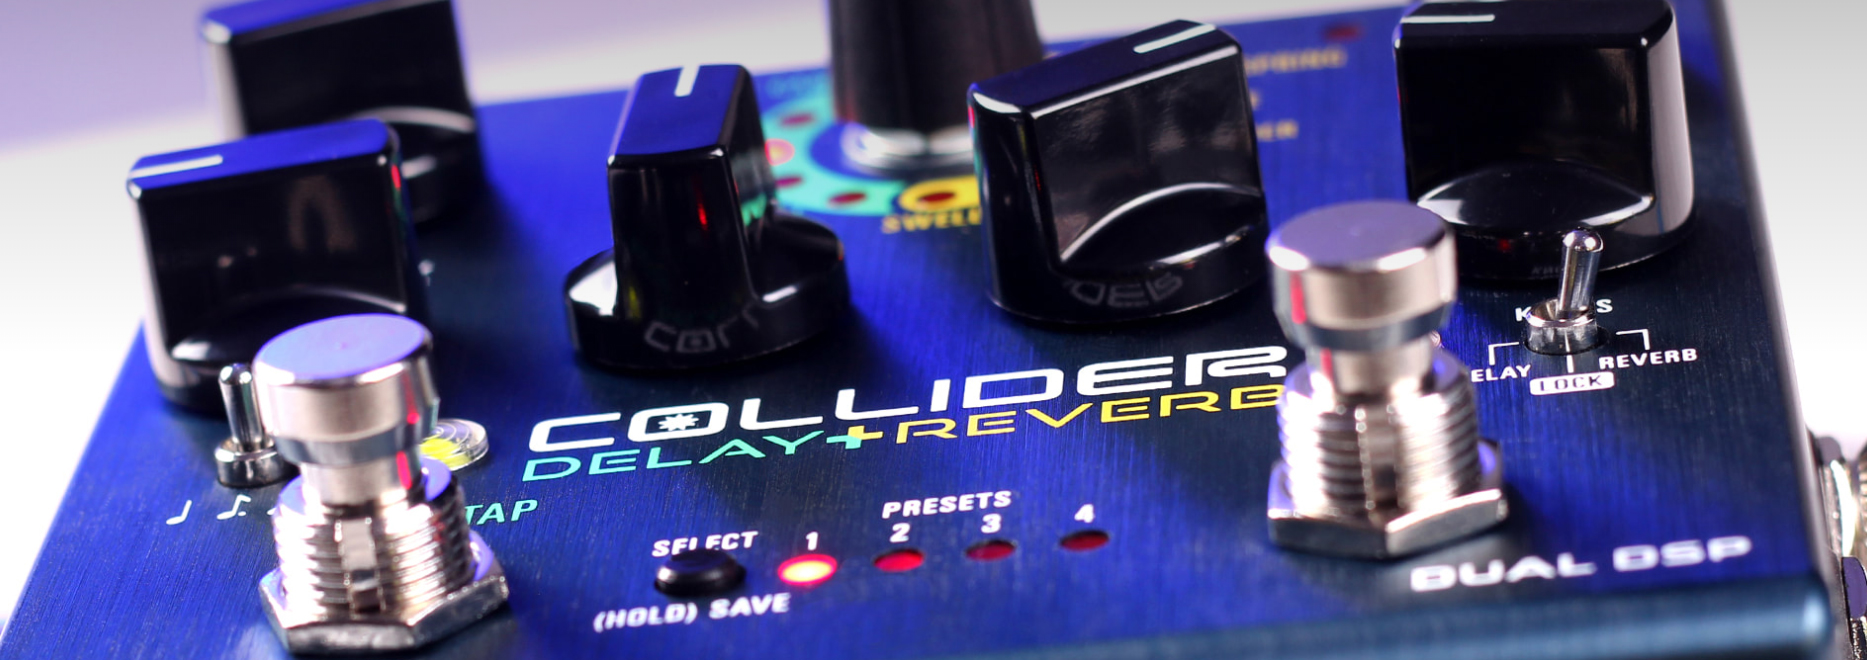 Source Audio Collider Delay+reverb - Reverb, delay & echo effect pedal - Variation 2